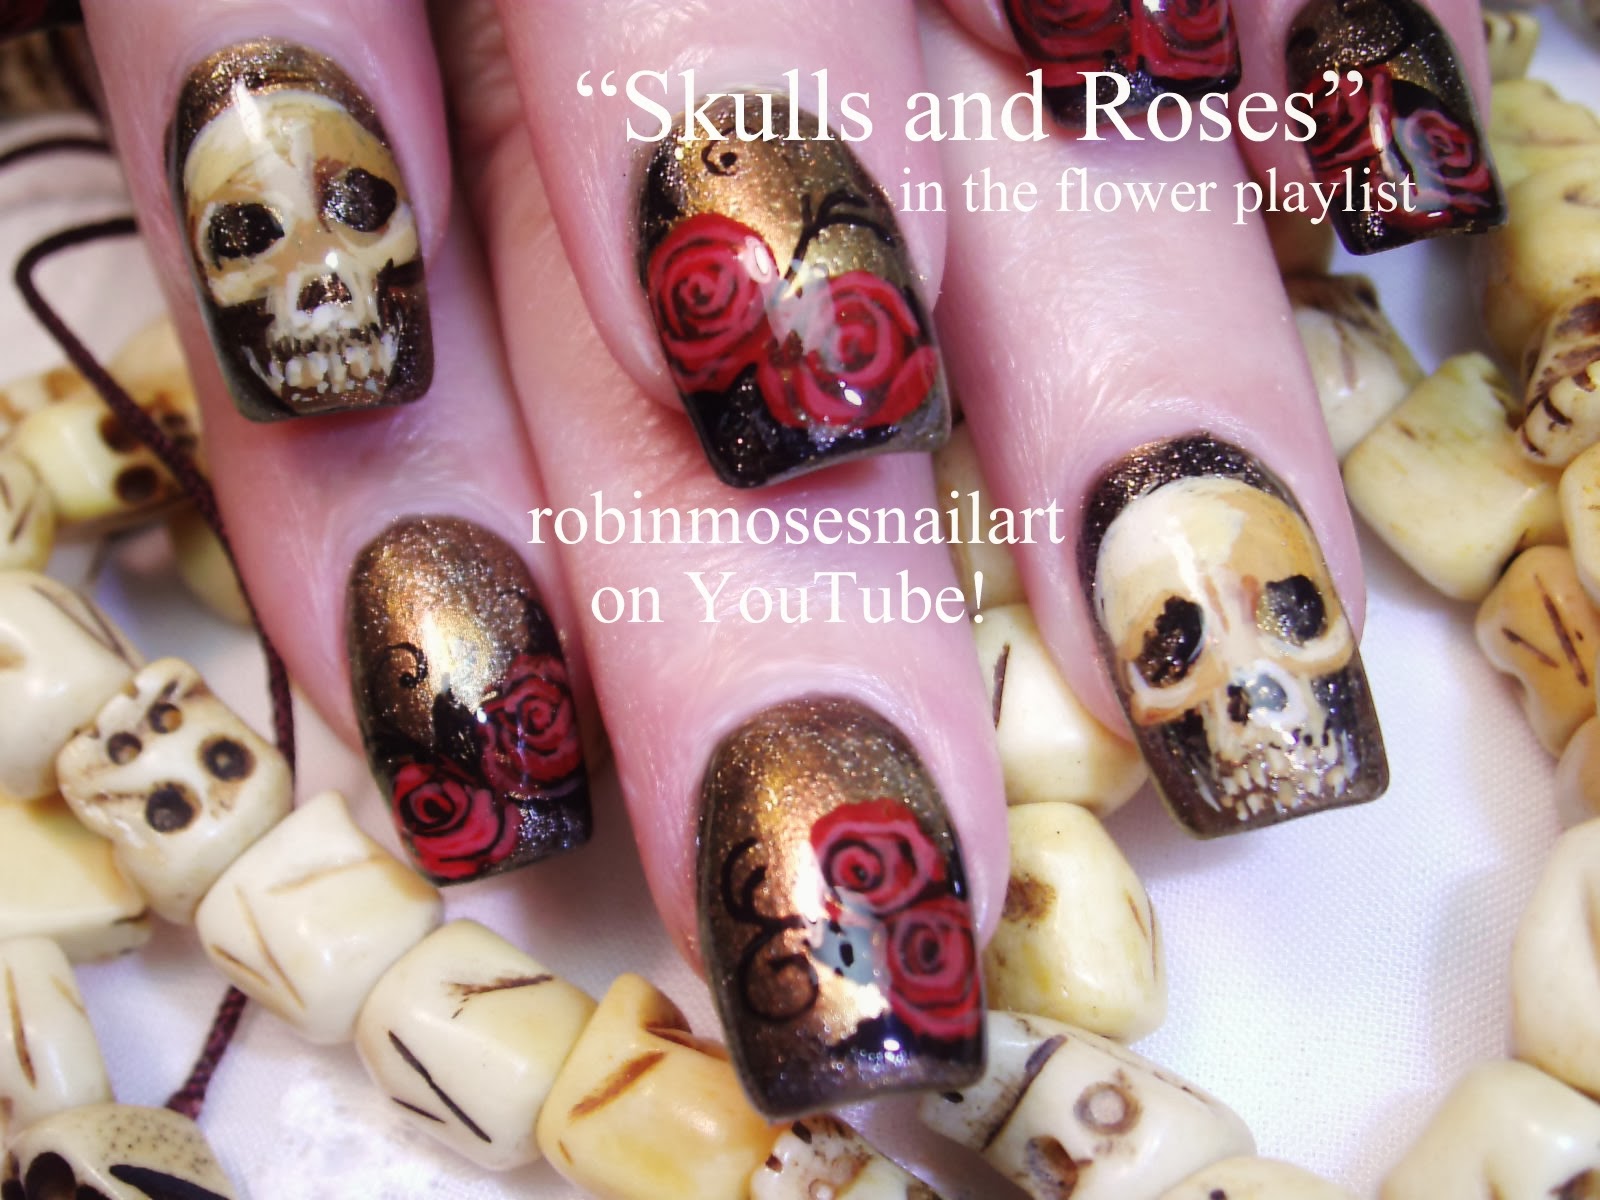 2. "Zombie nail art designs" - wide 3